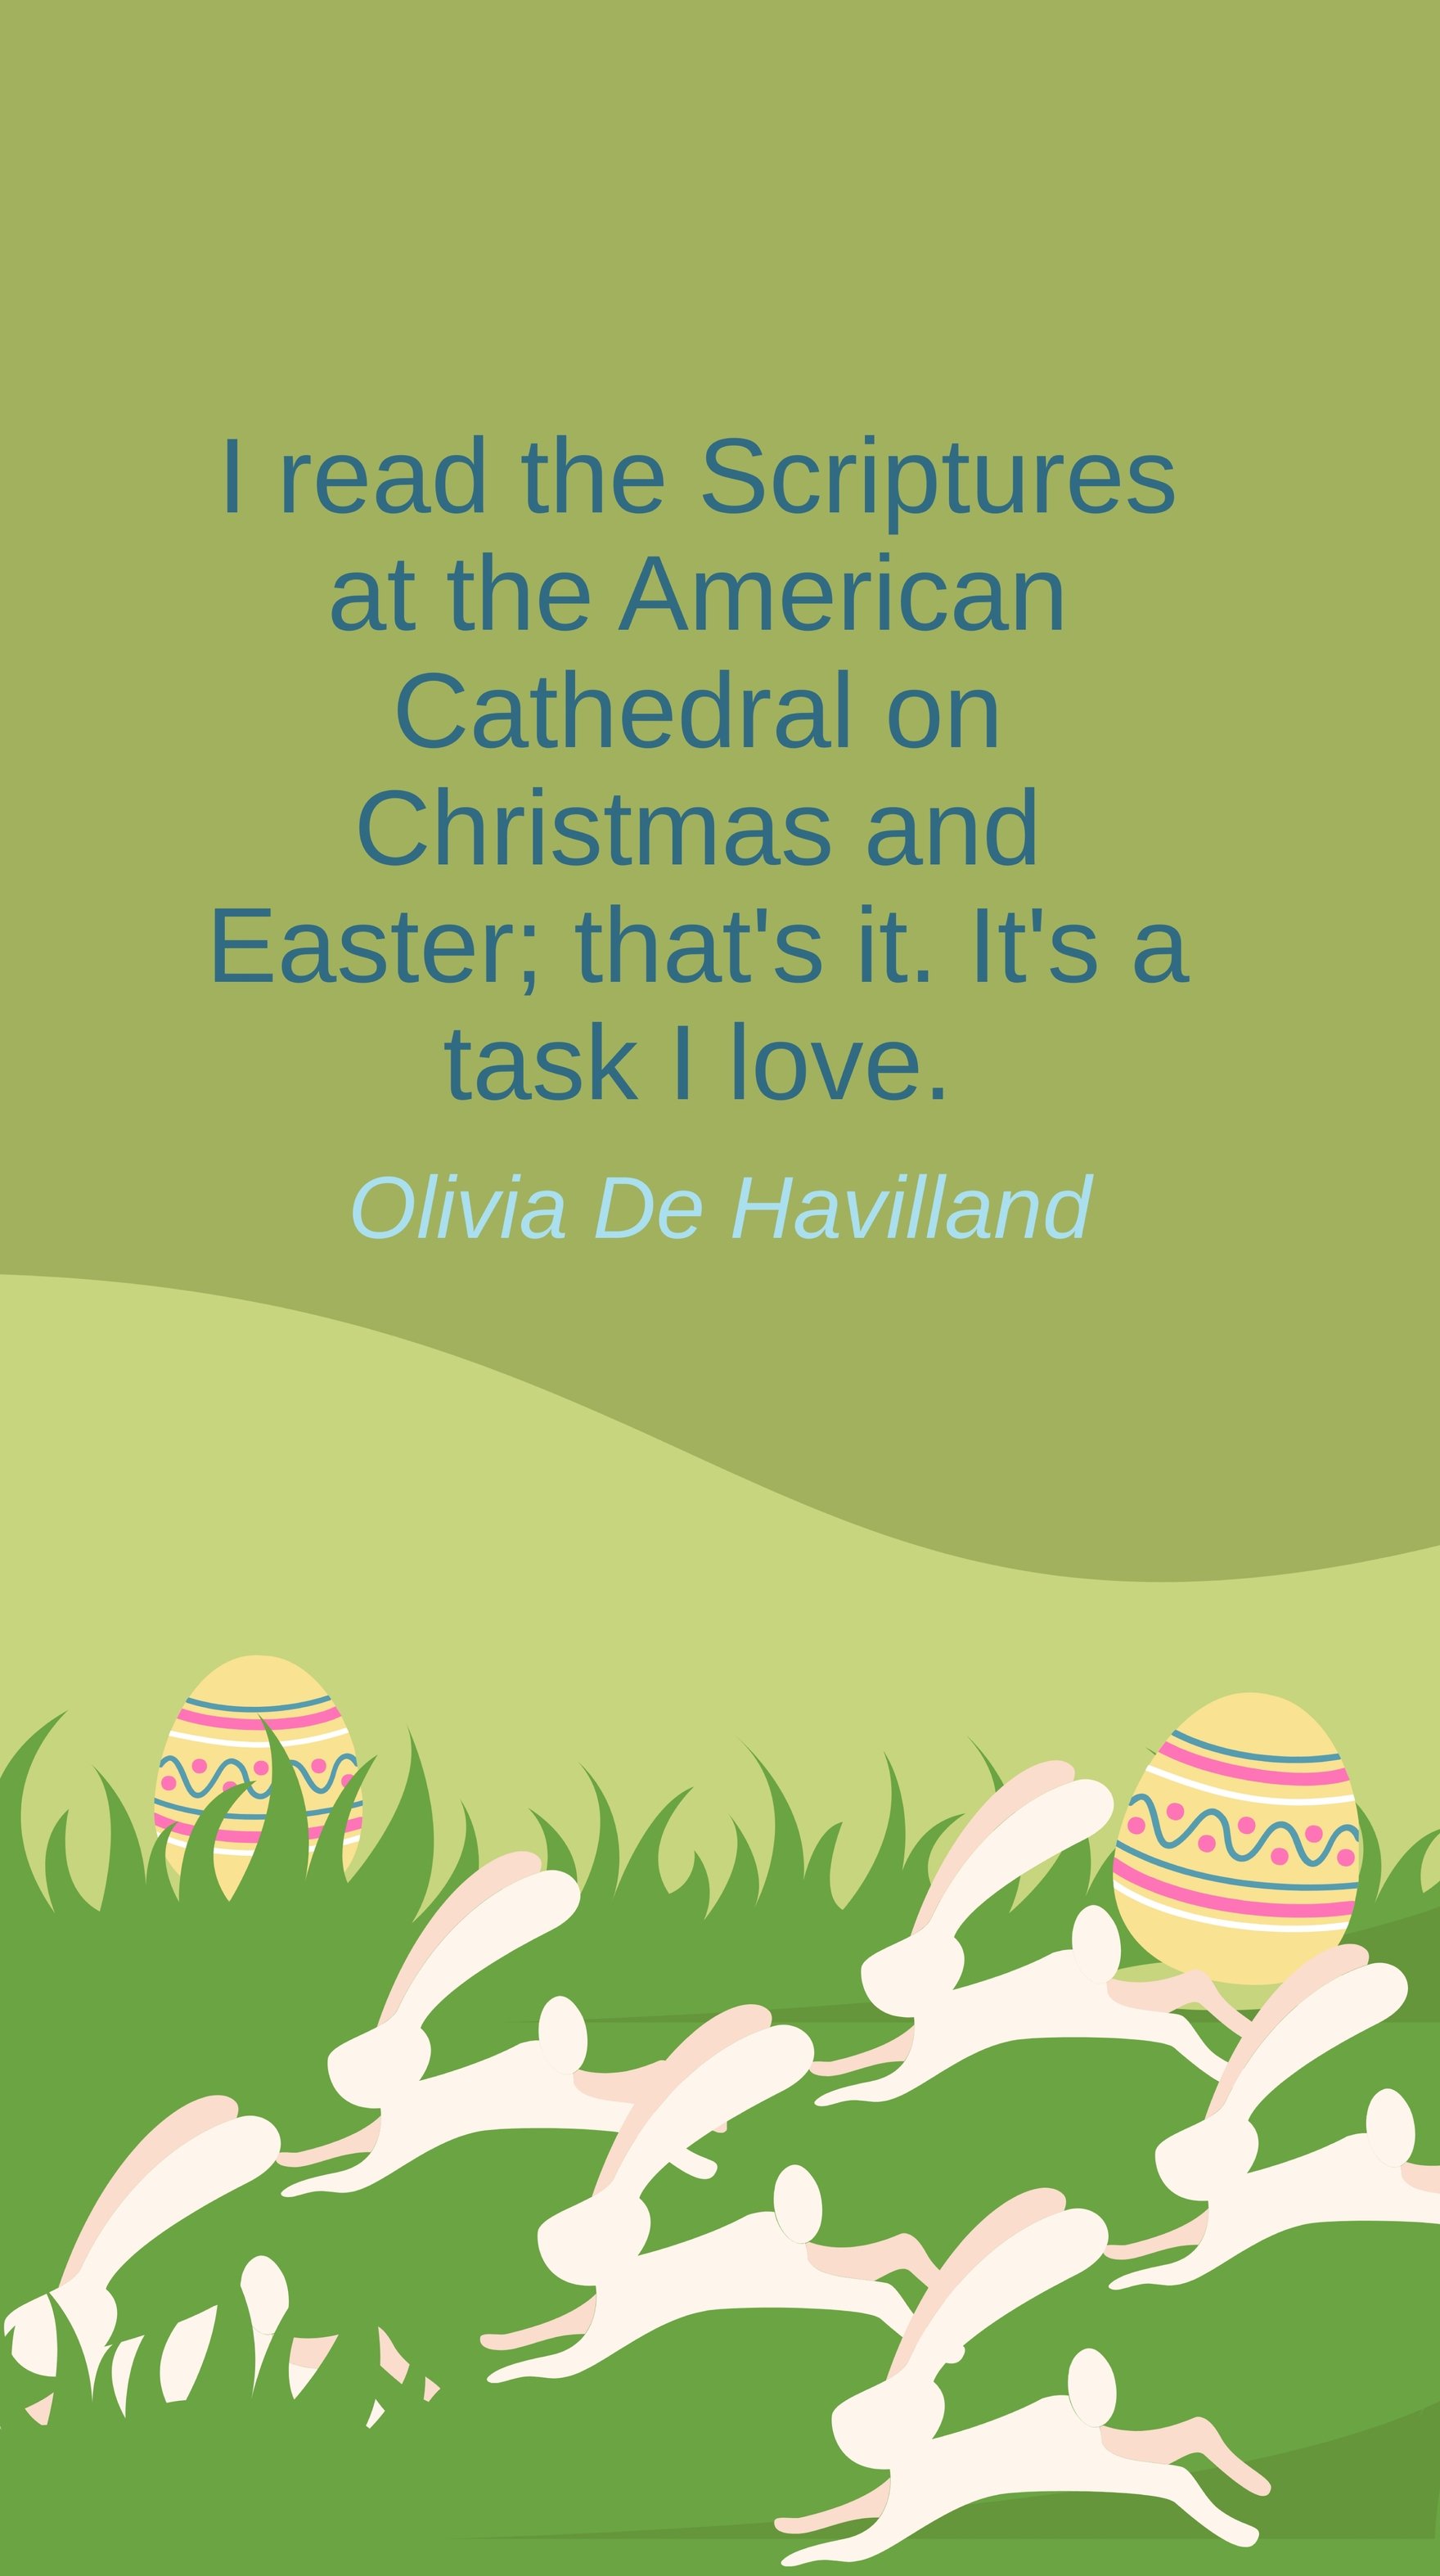 Olivia De Havilland - I read the Scriptures at the American Cathedral on Christmas and Easter; that's it. It's a task I love.